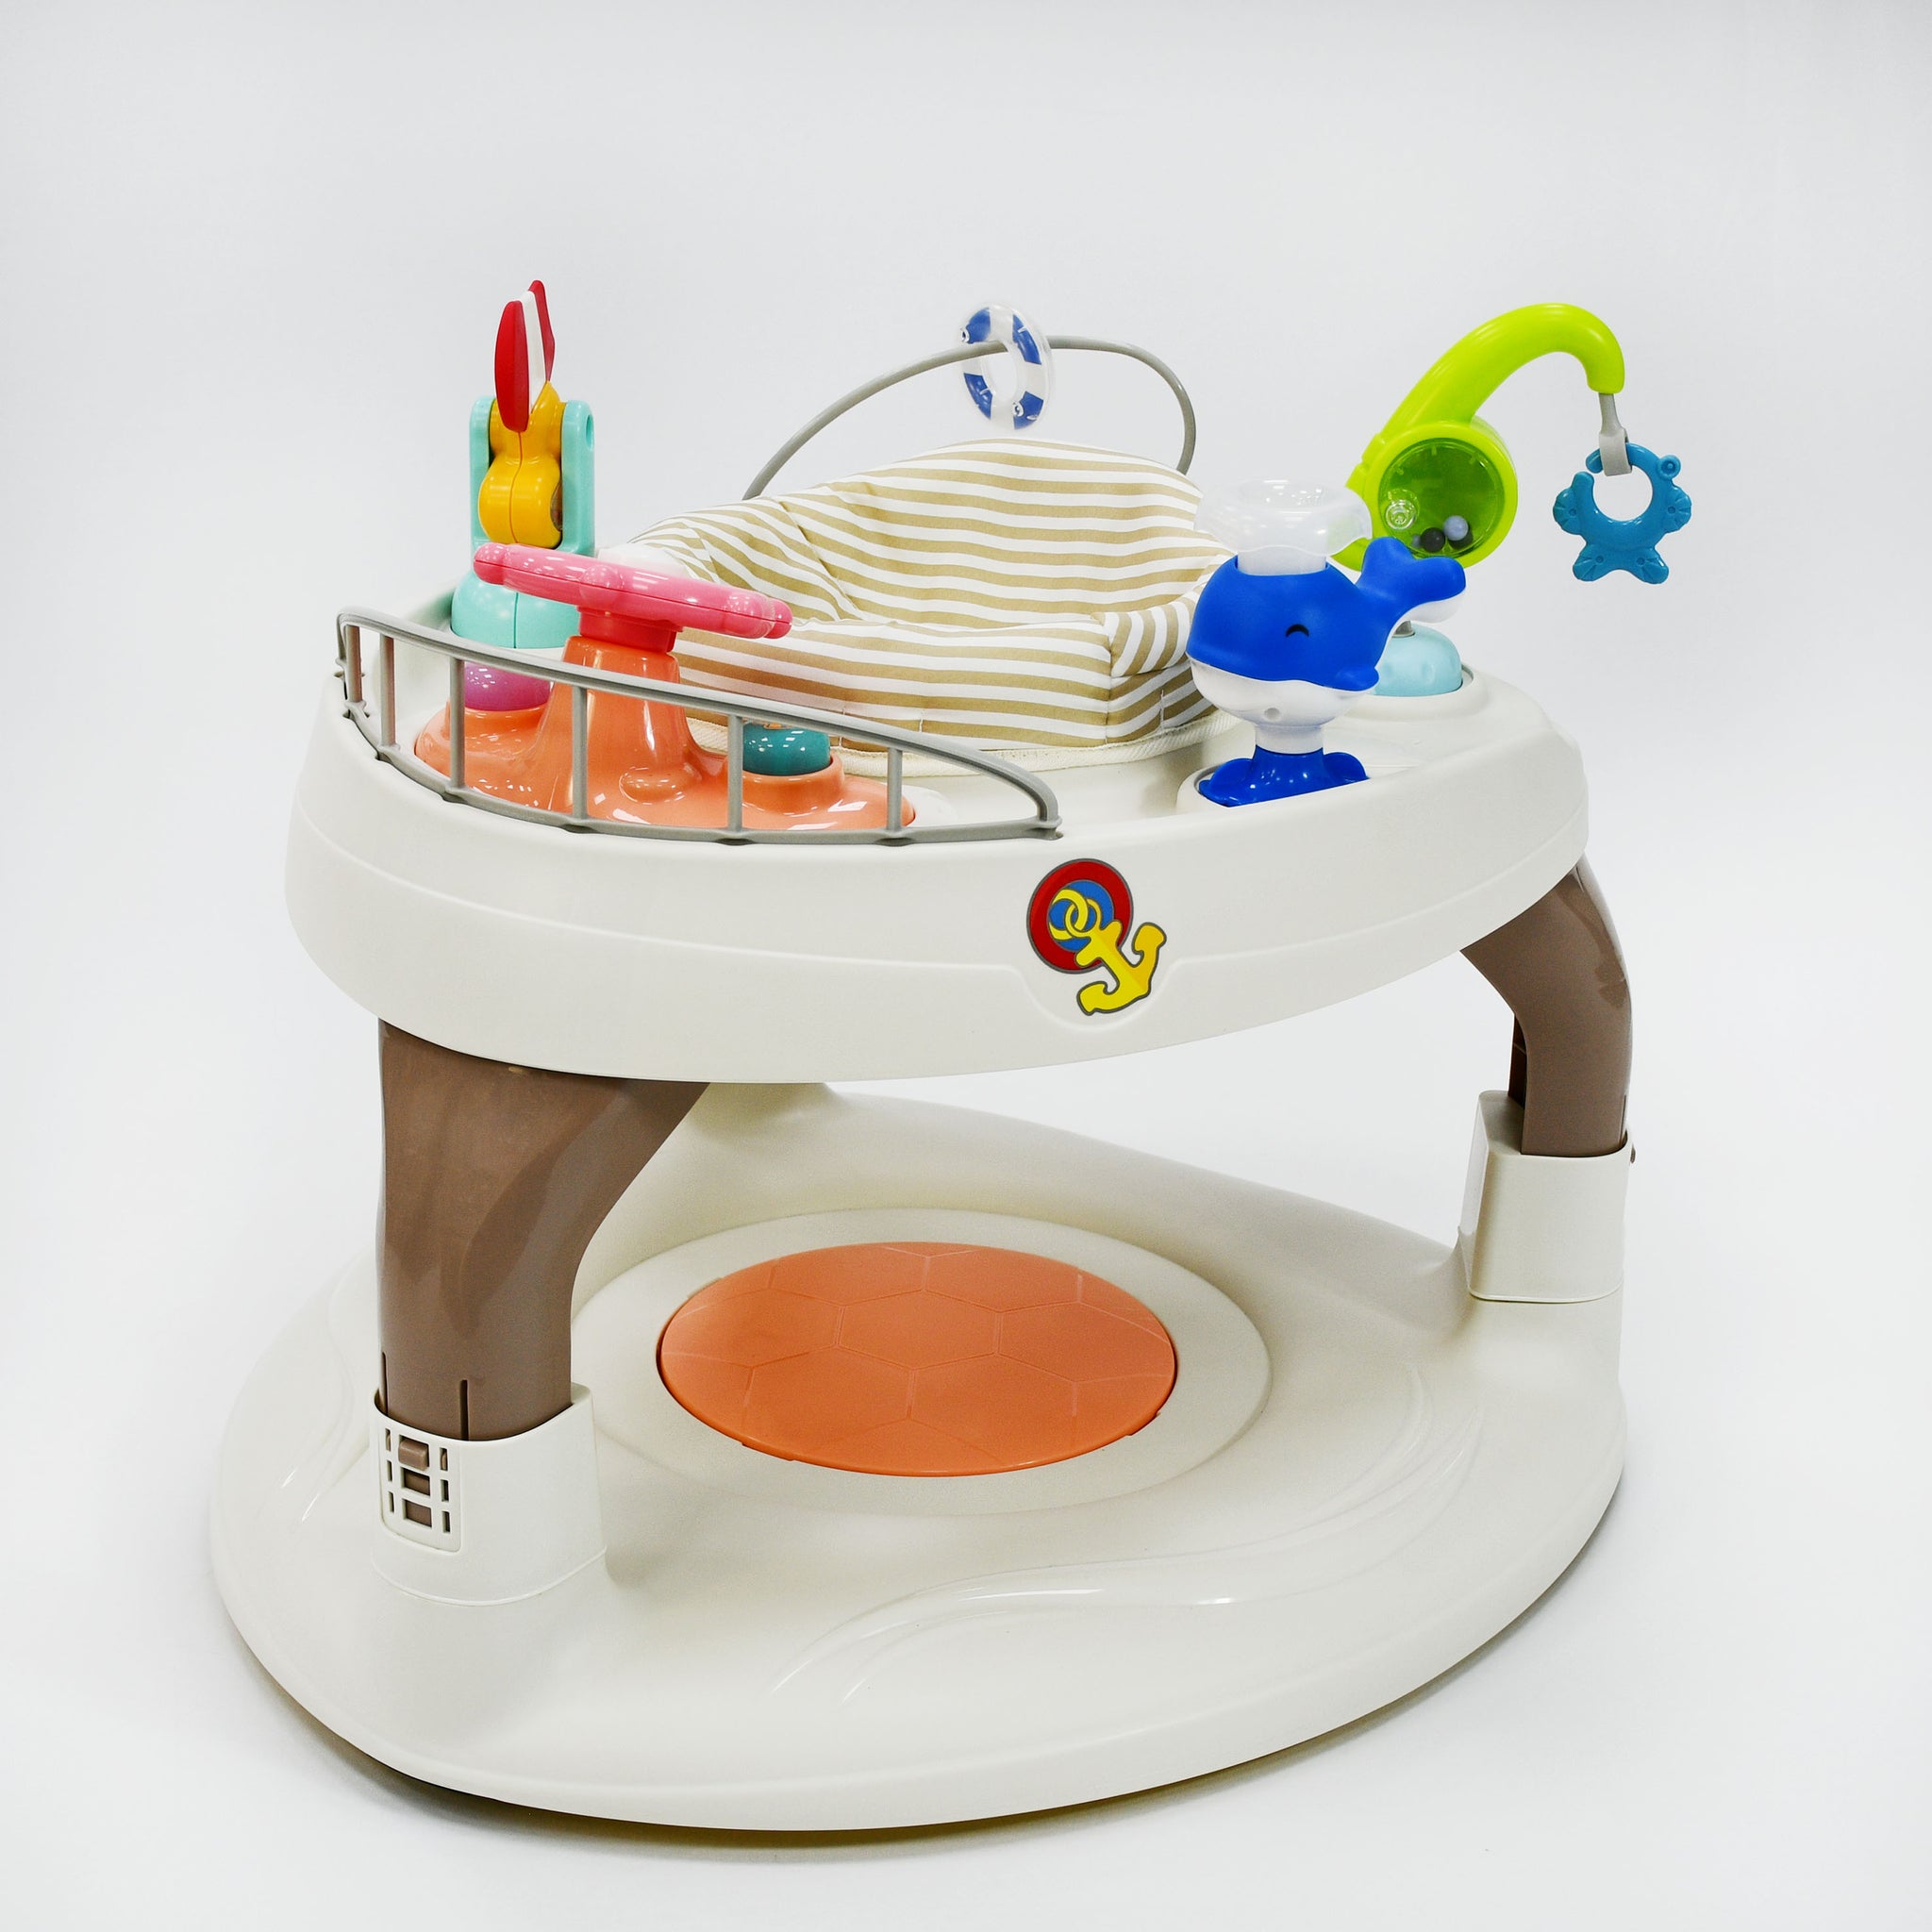 dessert sand activity center with toys in tray